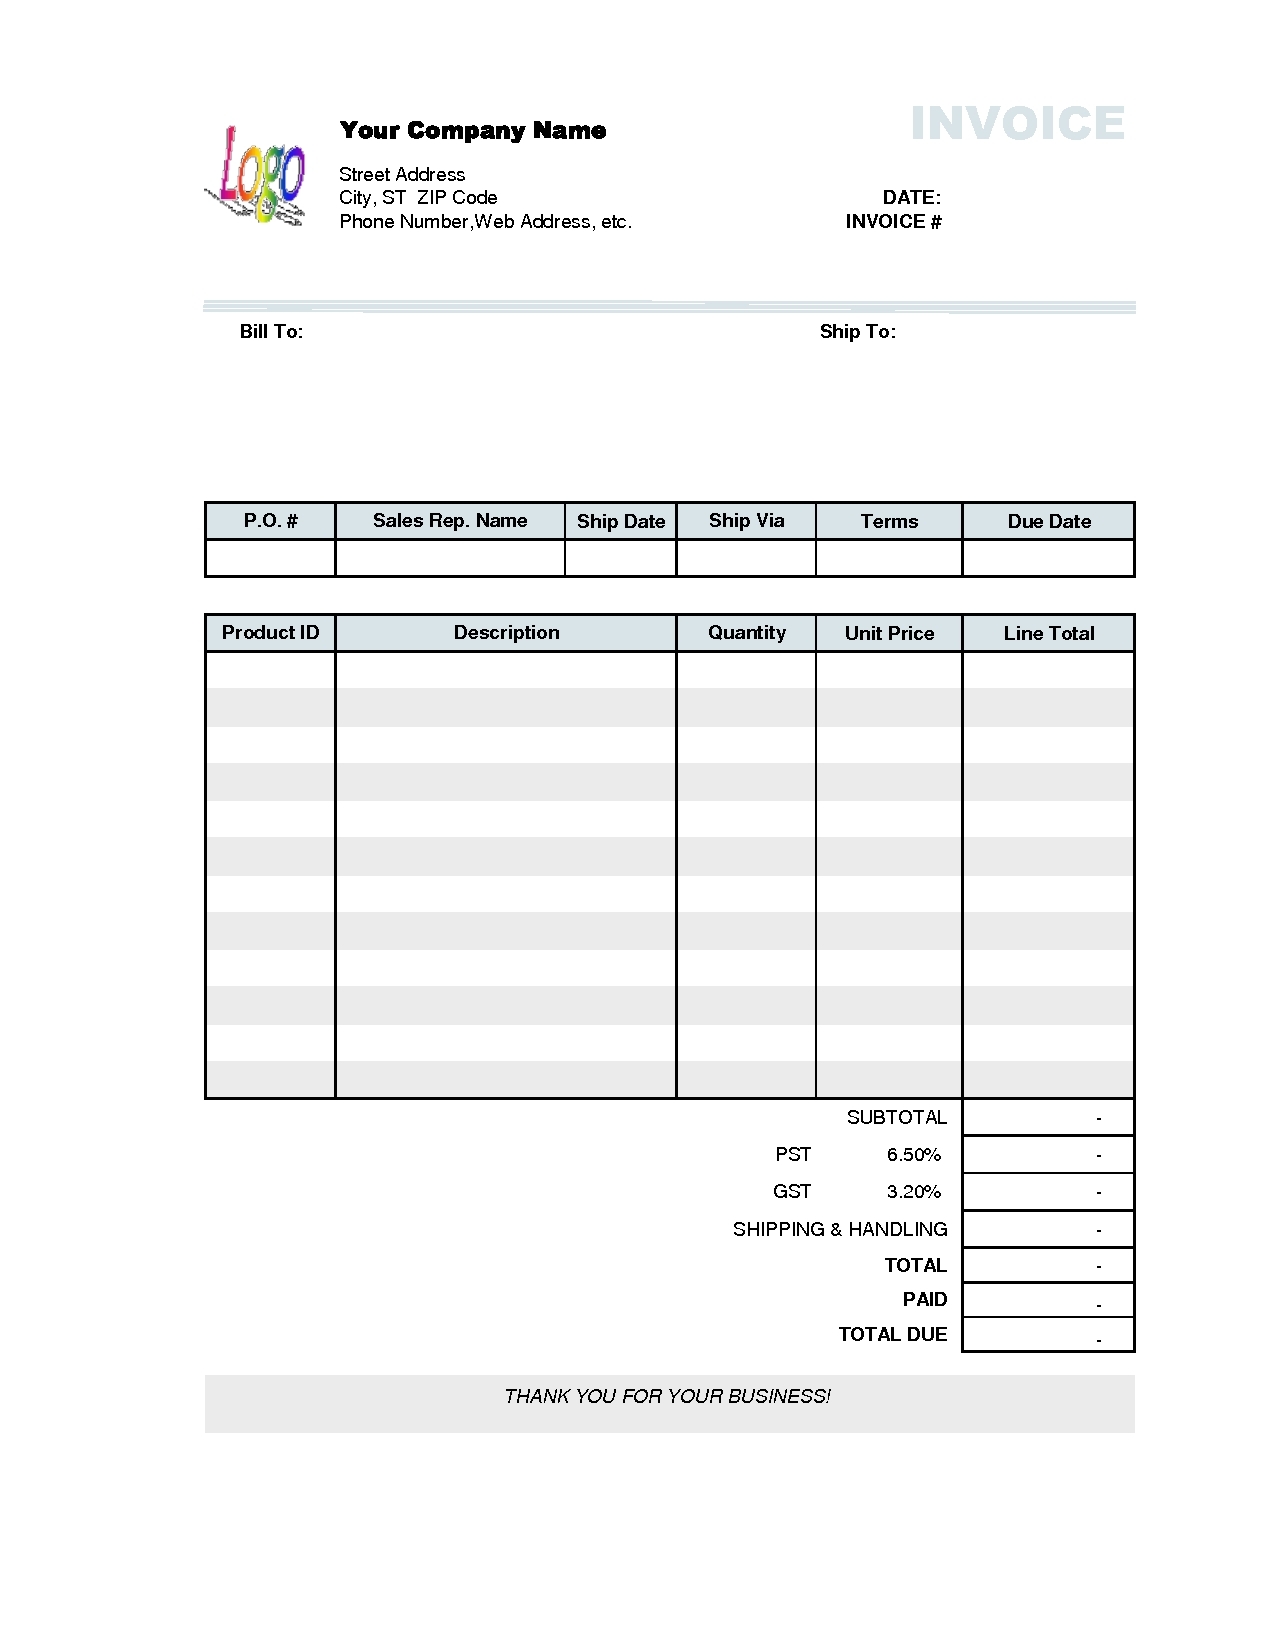 Types Of Invoices * Invoice Template Ideas